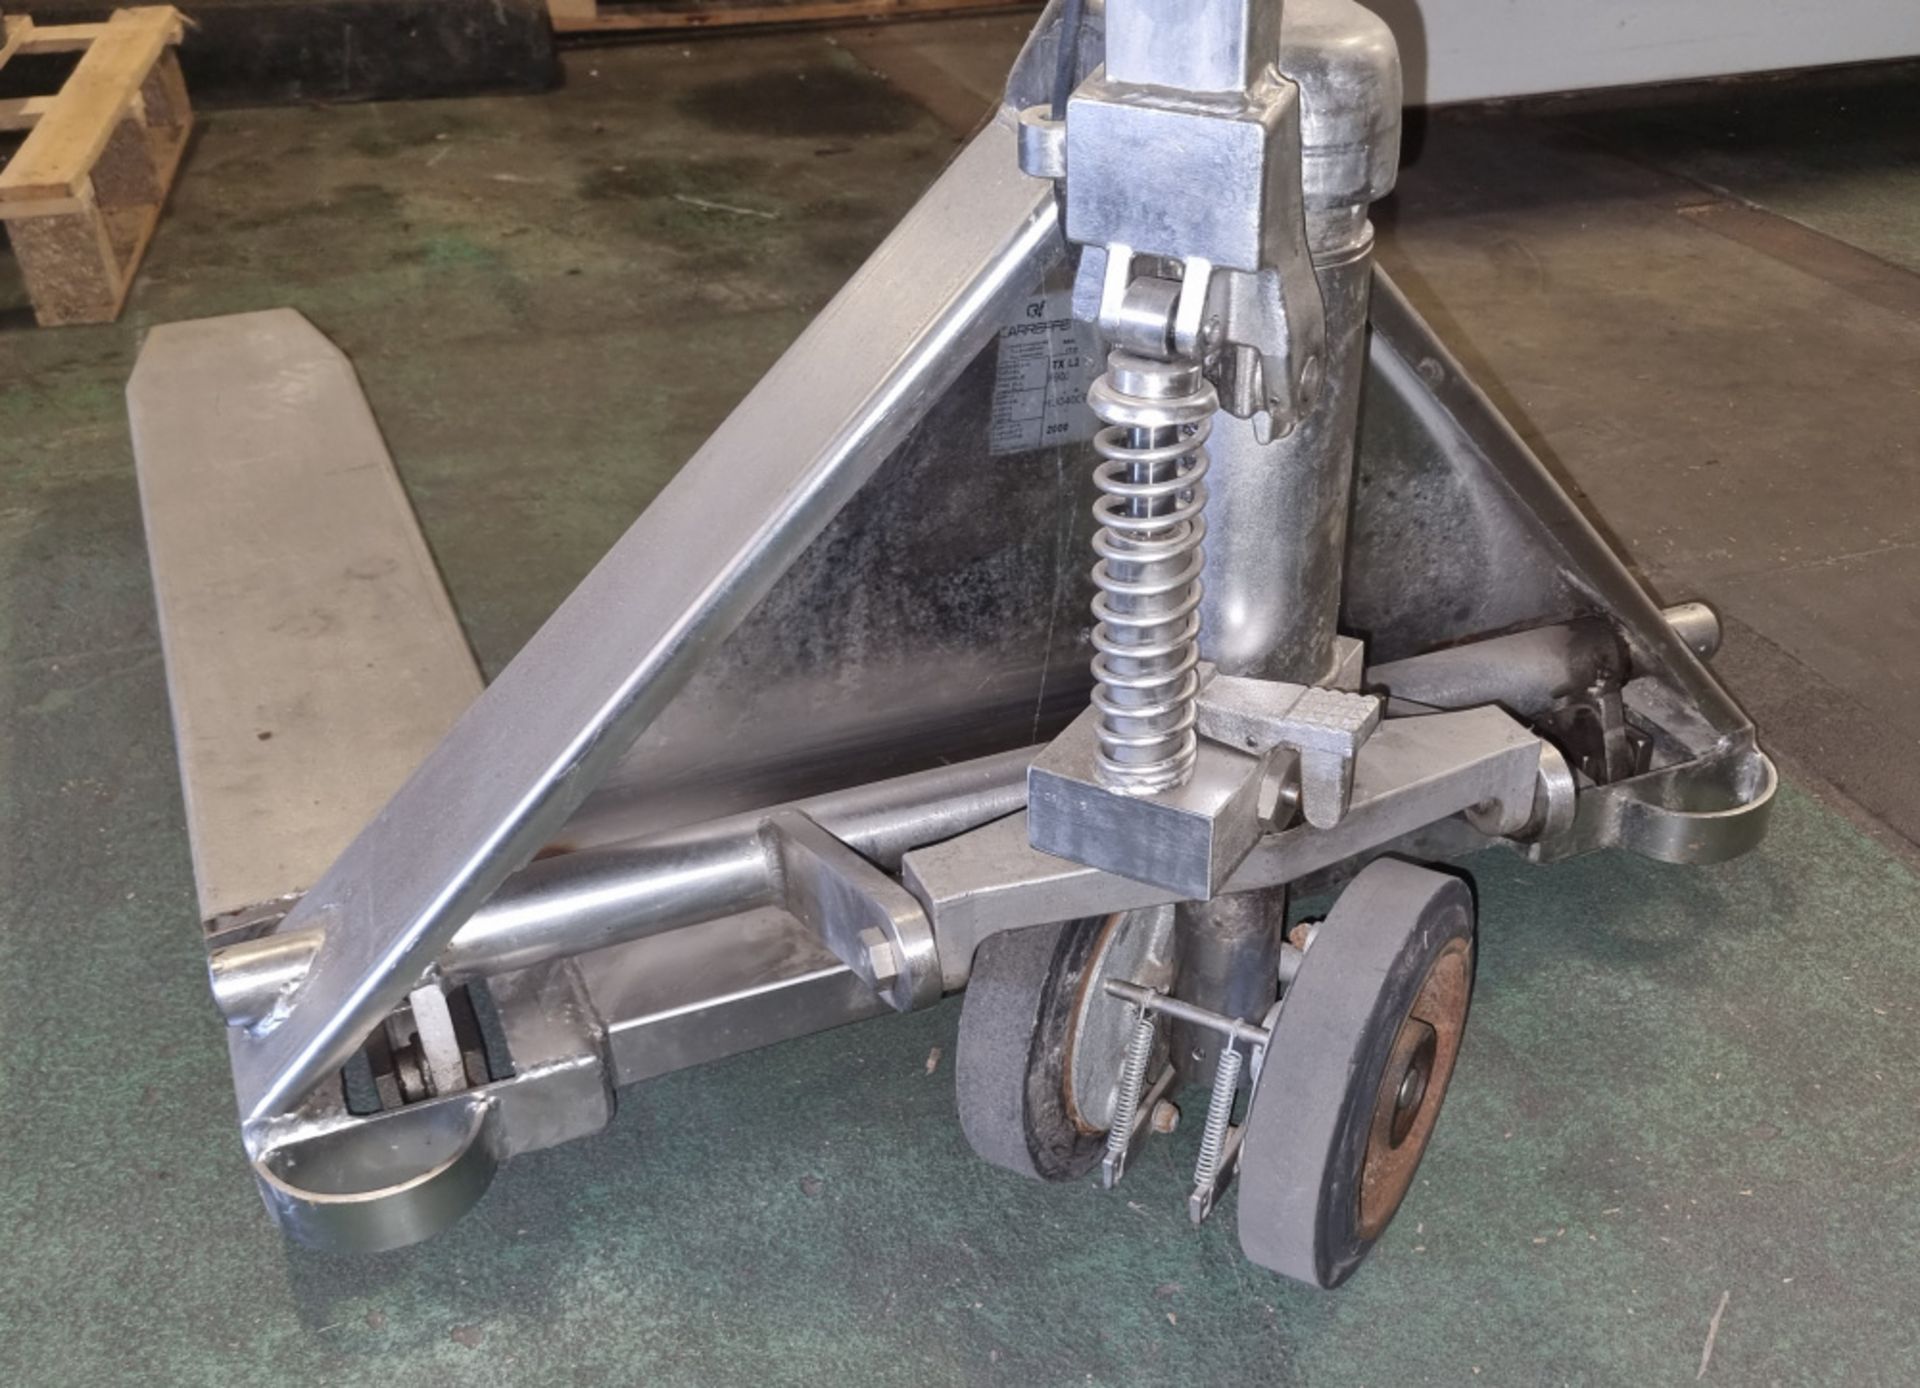 Stainless steel pallet truck with removable fork height extensions Carreffe TX L2 - 2000kg - Image 4 of 4